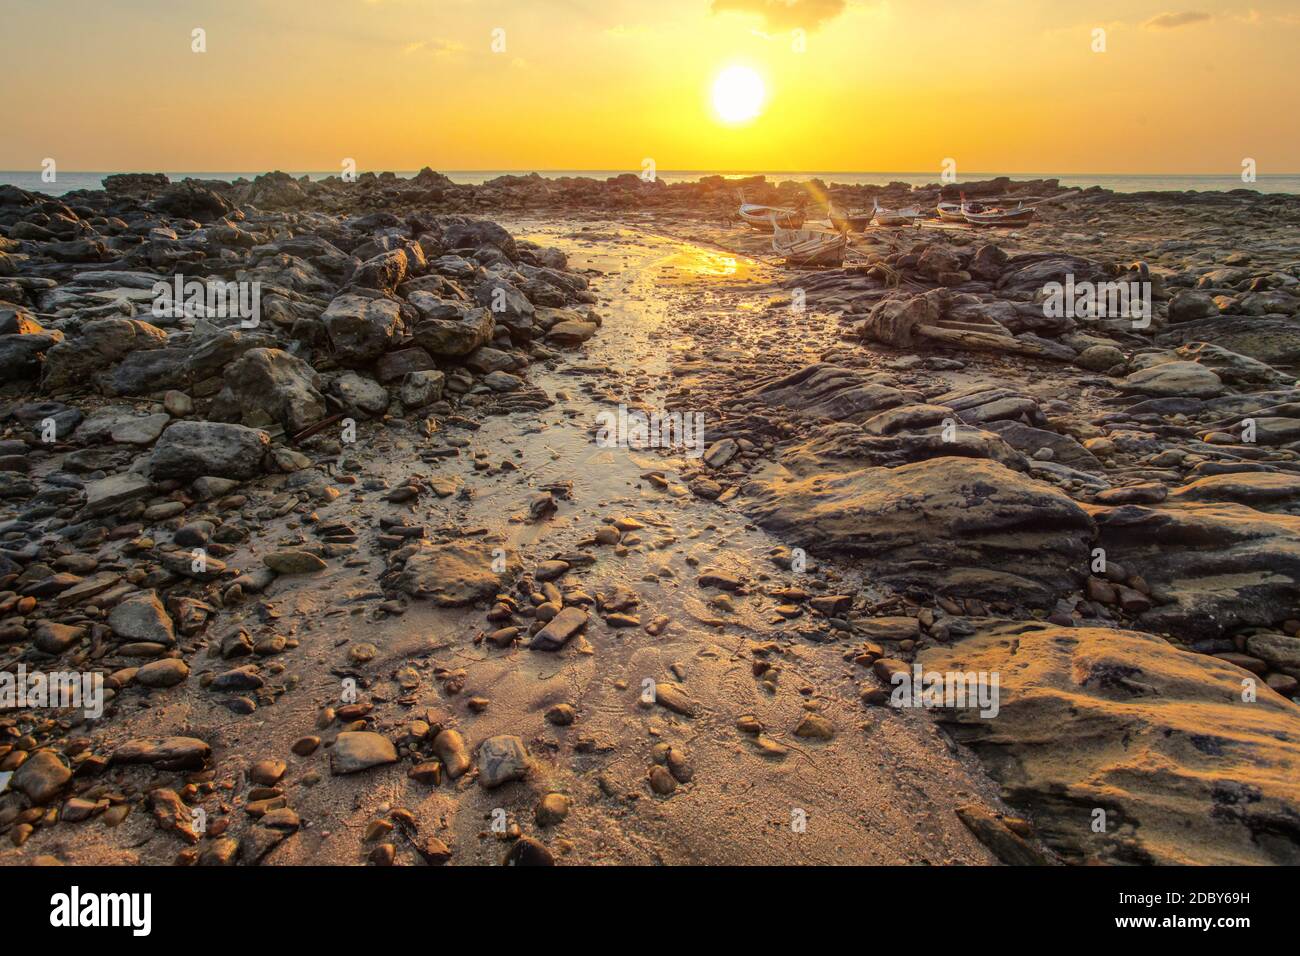 Rocks and beach uncovered in low tide with boats on dry land in background  during evening sunset back light. Koh Lanta, Thailand Stock Photo - Alamy